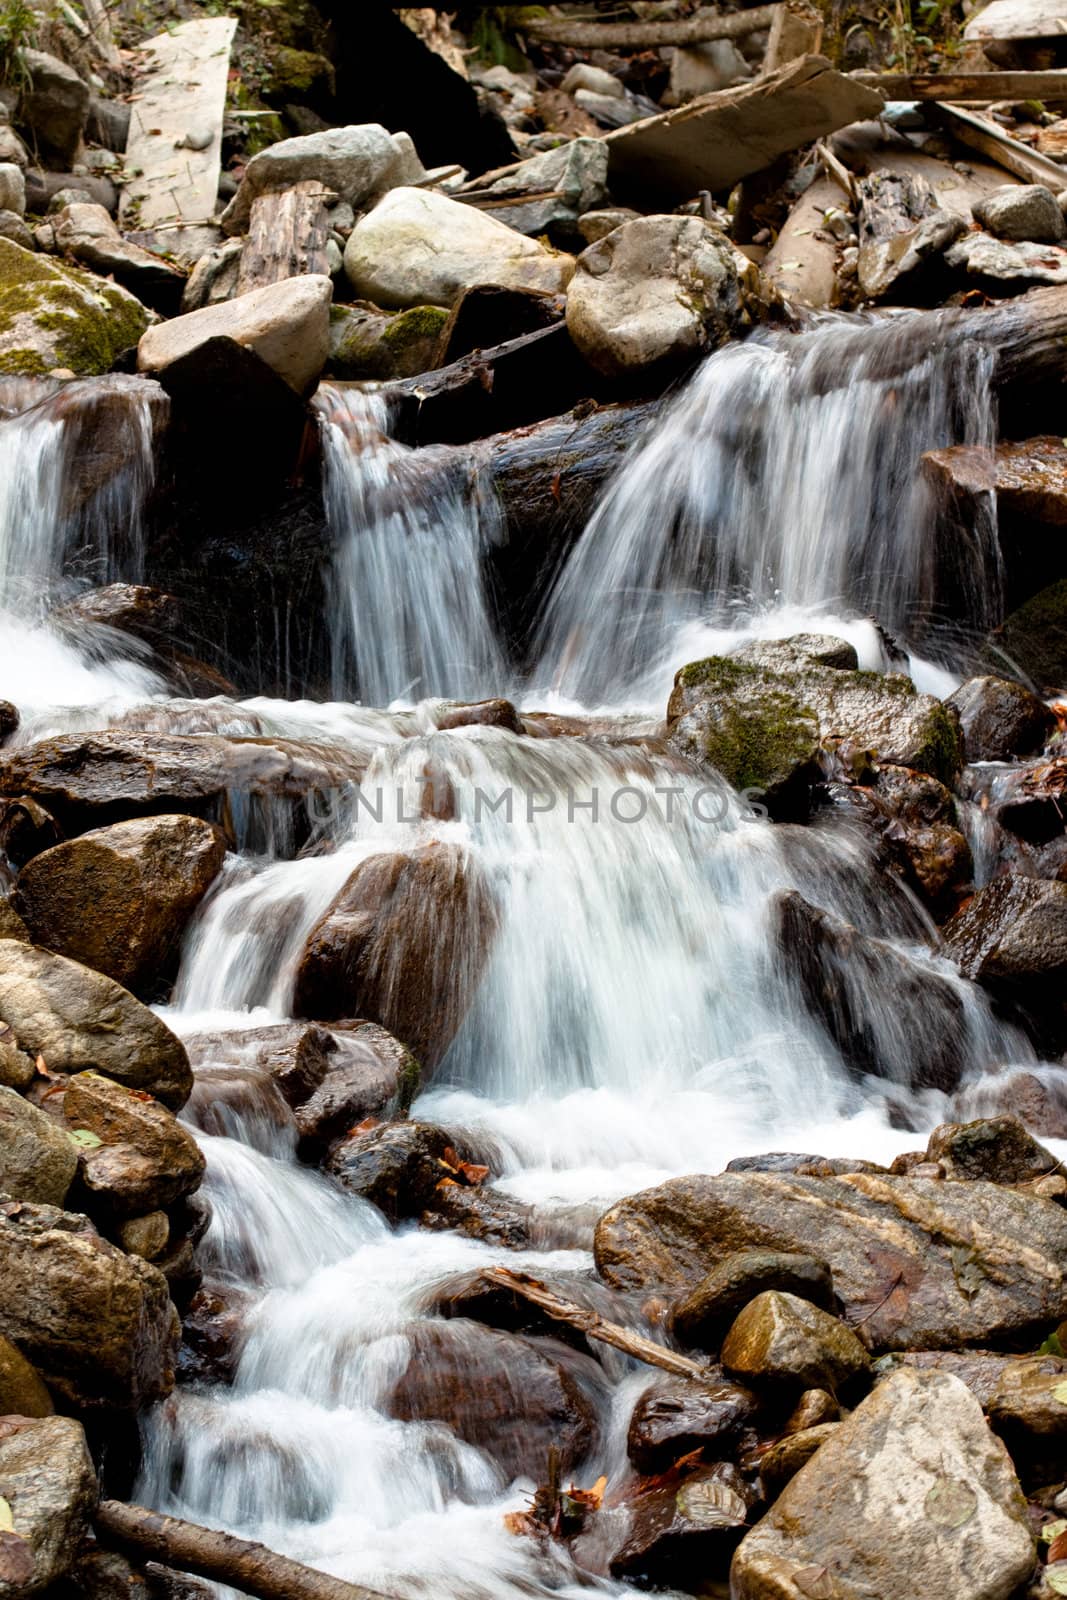 A small waterfall surrounded by stones and logs
